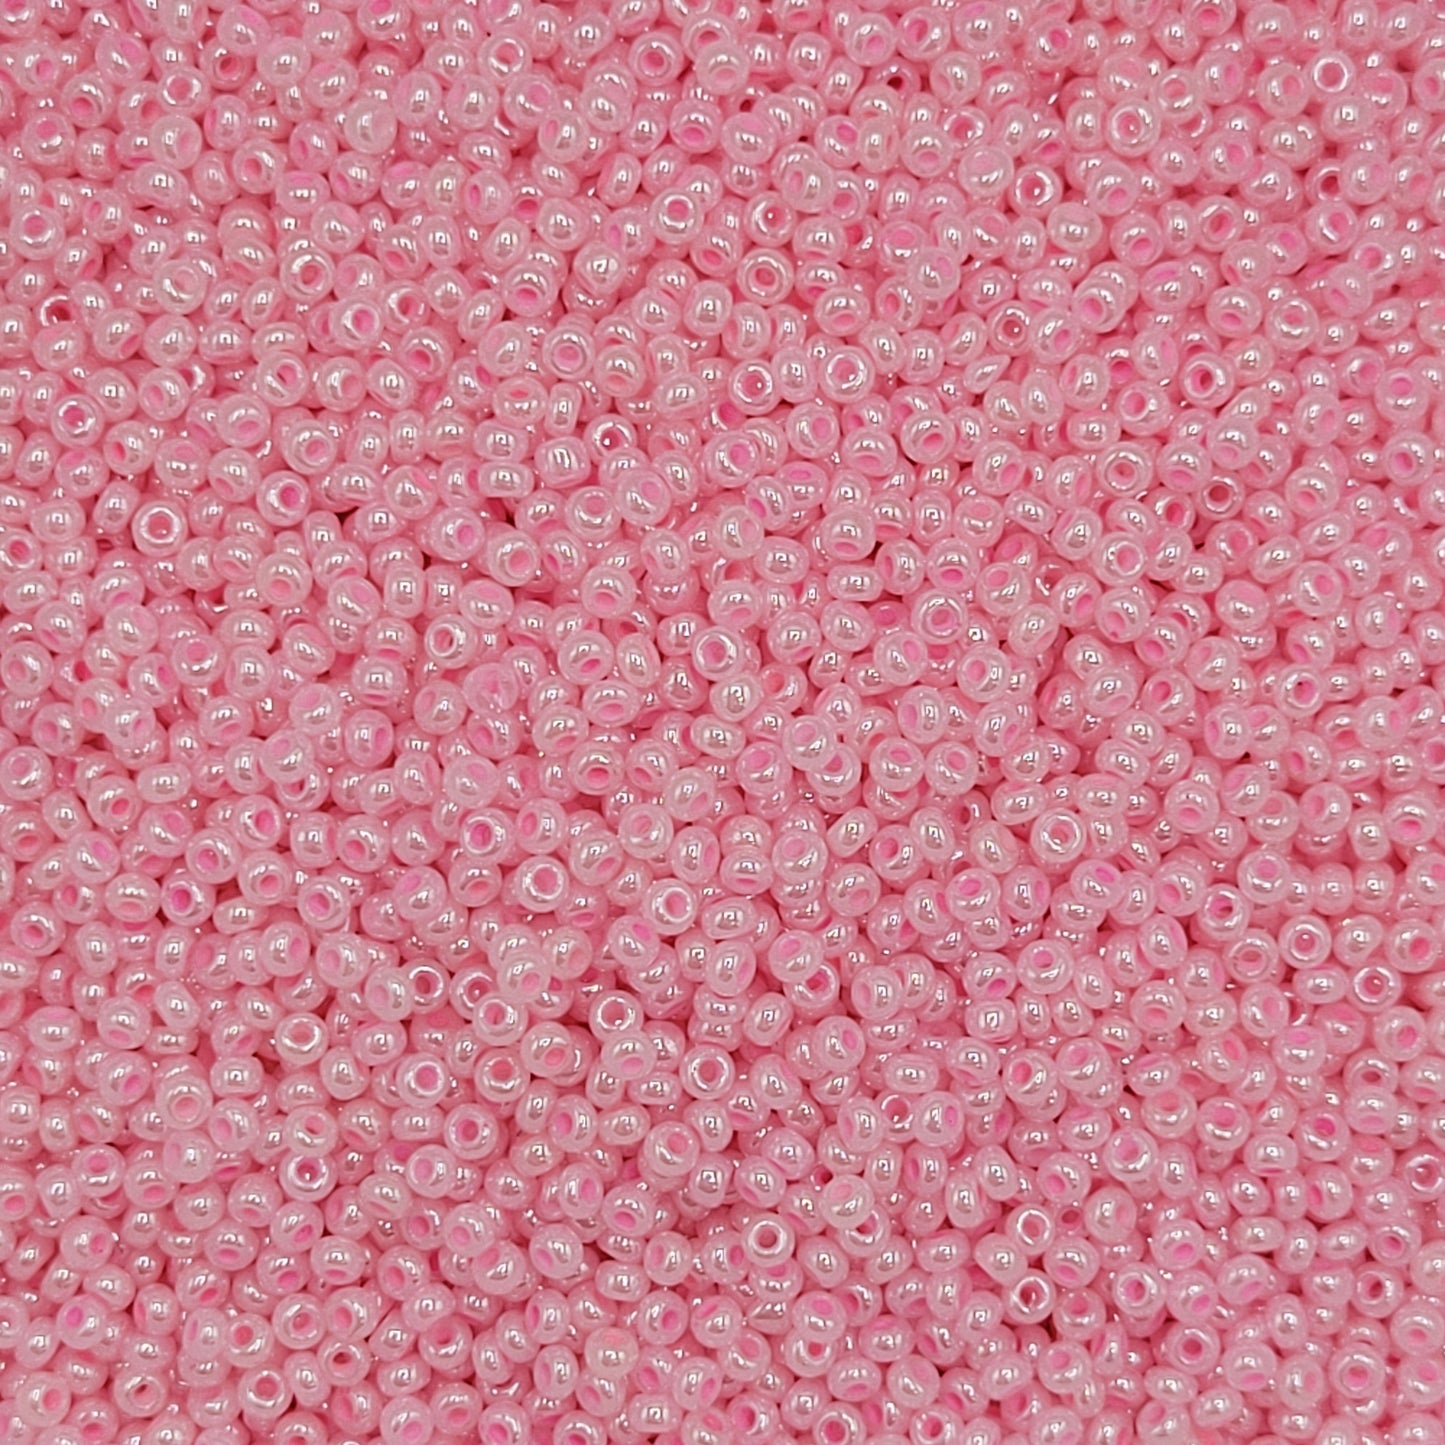 Beads - Vibrant - Baby Pink